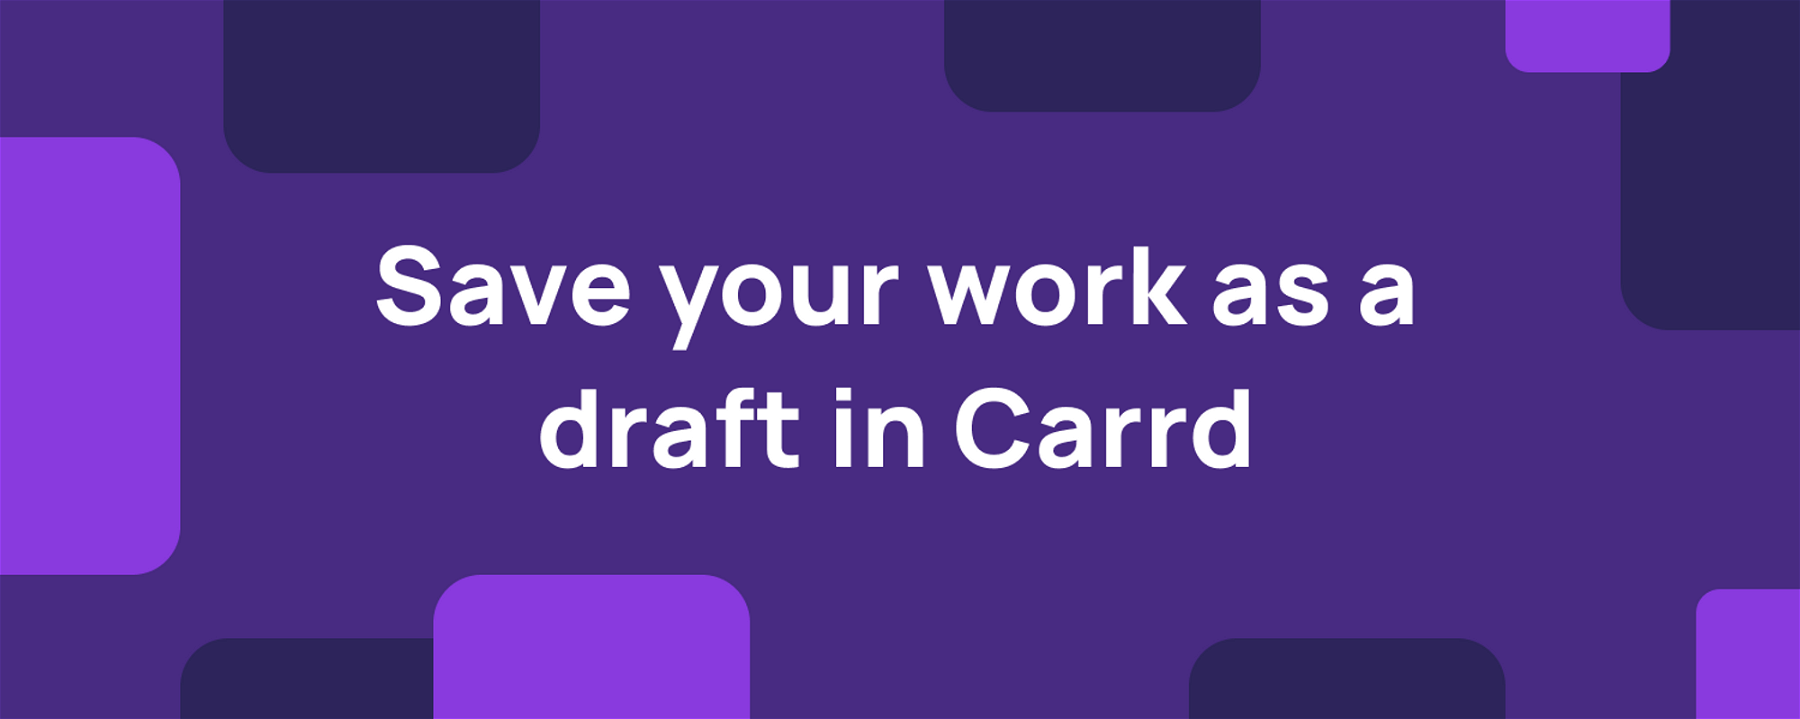 Save your work as a draft in Carrd